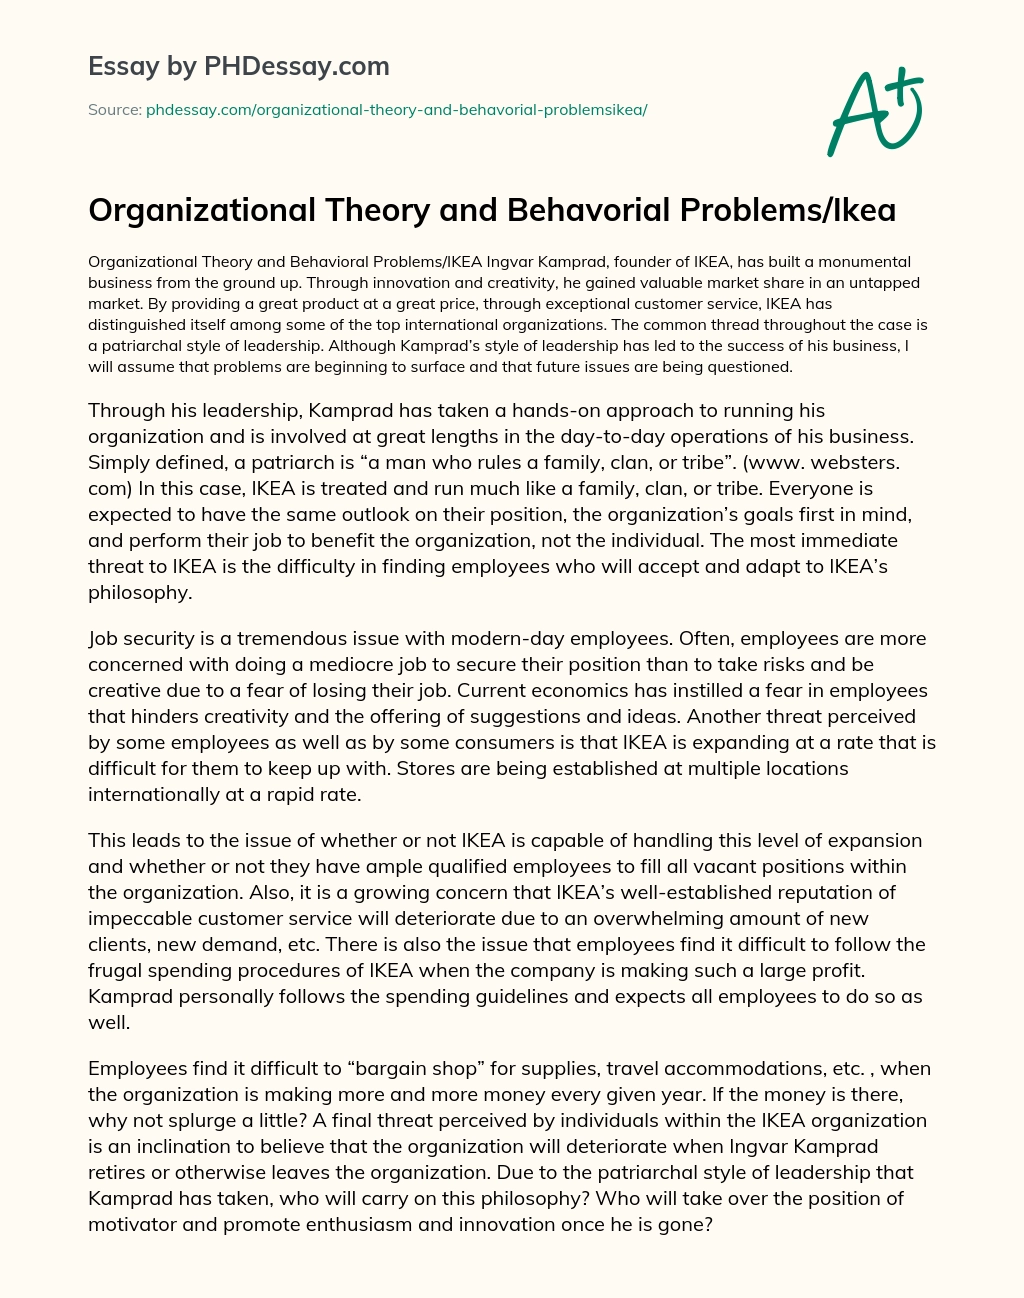 Organizational Theory and Behavorial Problems/Ikea essay